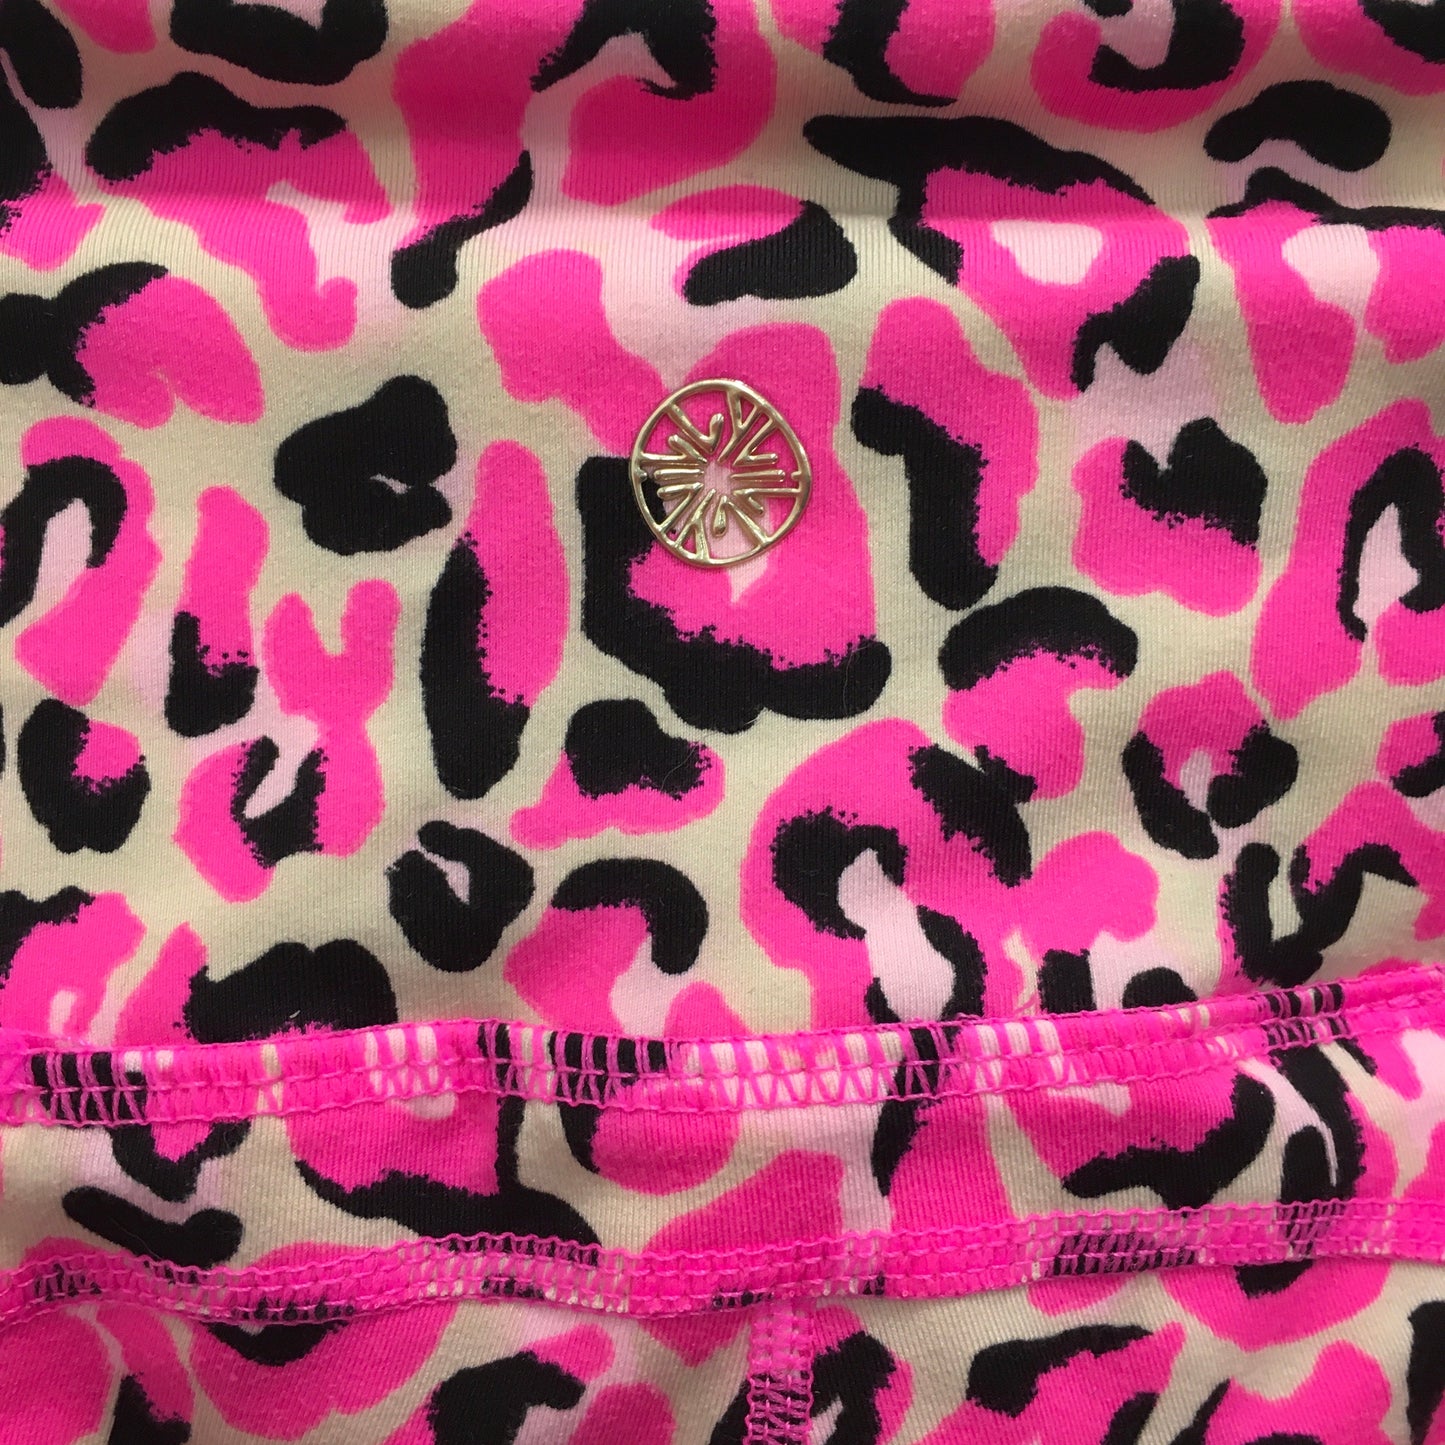 Athletic Leggings By Lilly Pulitzer  Size: Xxs